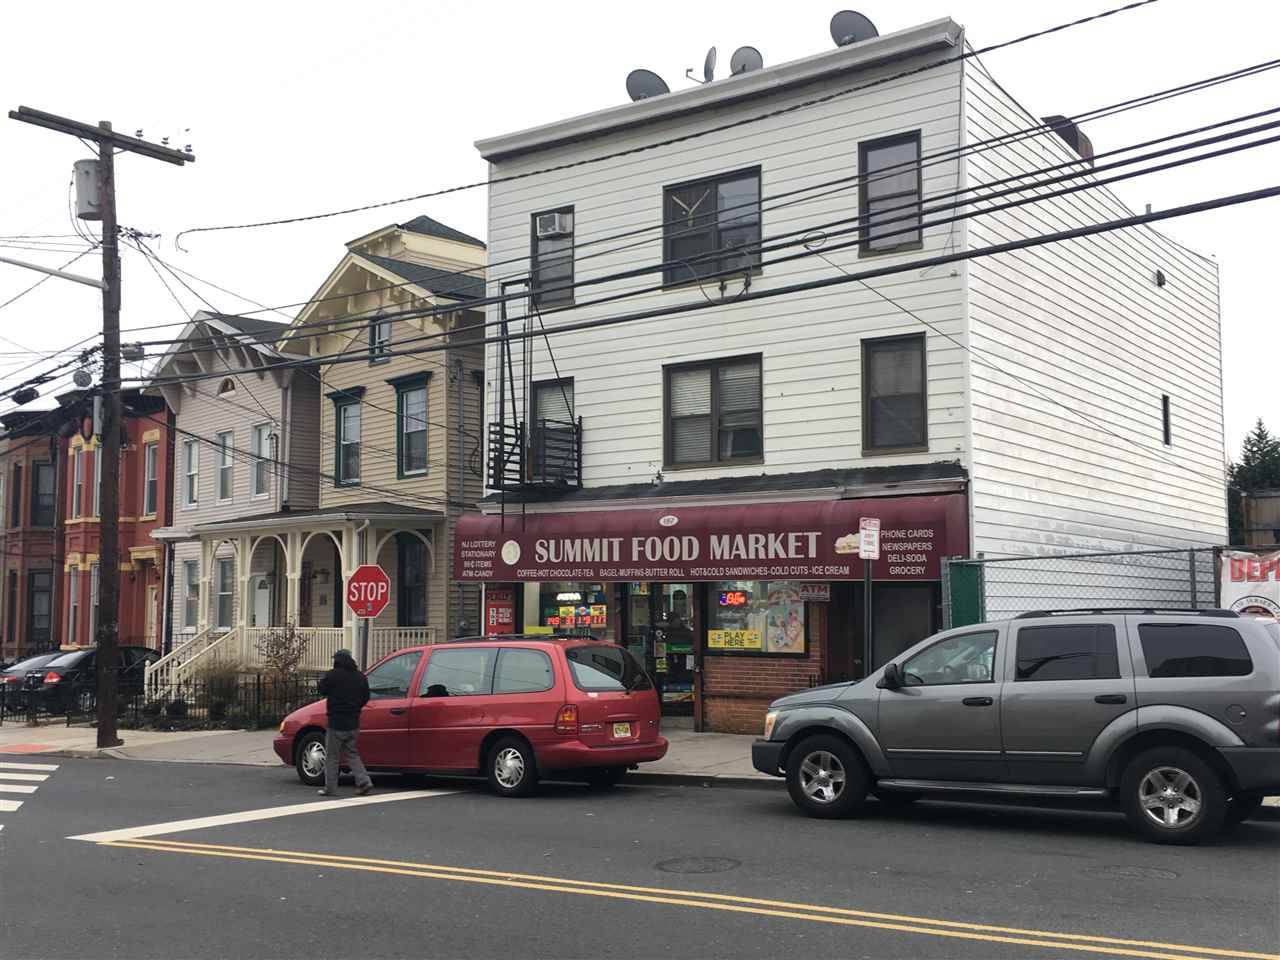 3 apartments: 3 bedroom $1 - Retail New Jersey